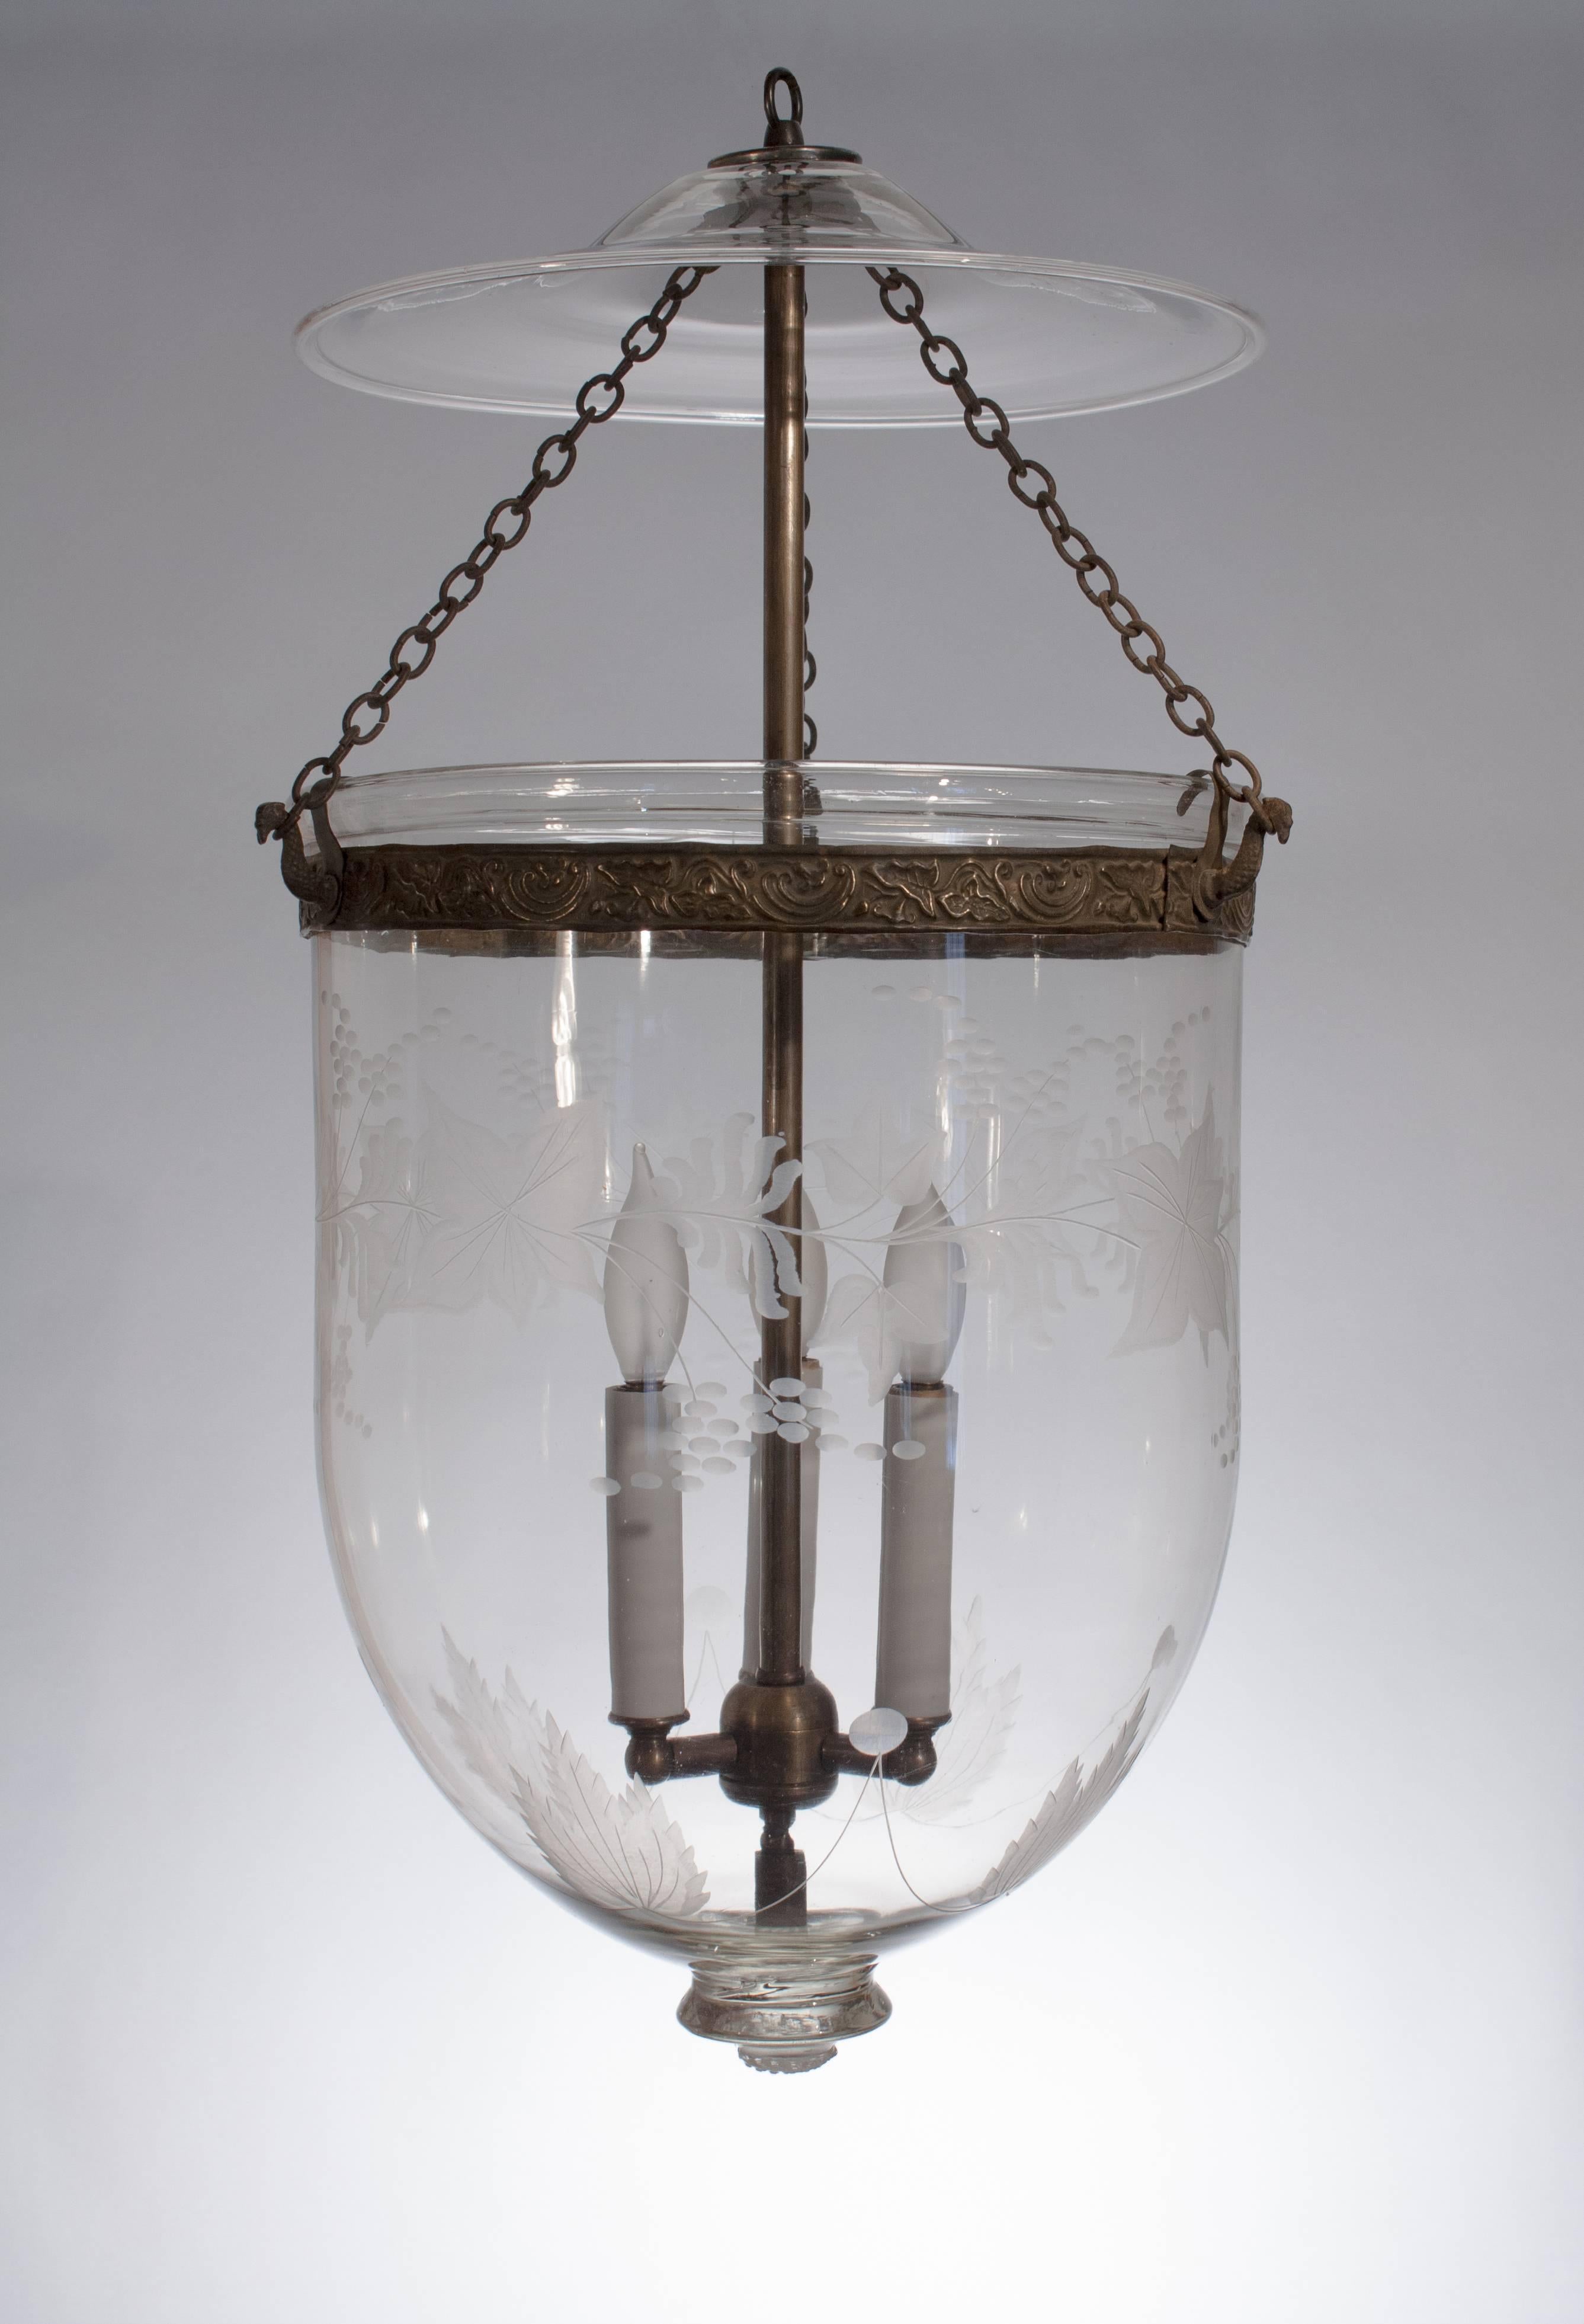 From our private collection, everything about this 19th century English handblown glass bell jar hall lantern is exceptional. Generously sized and classic in form, the bell jar features authentic brass fittings—including its pressed collar band and